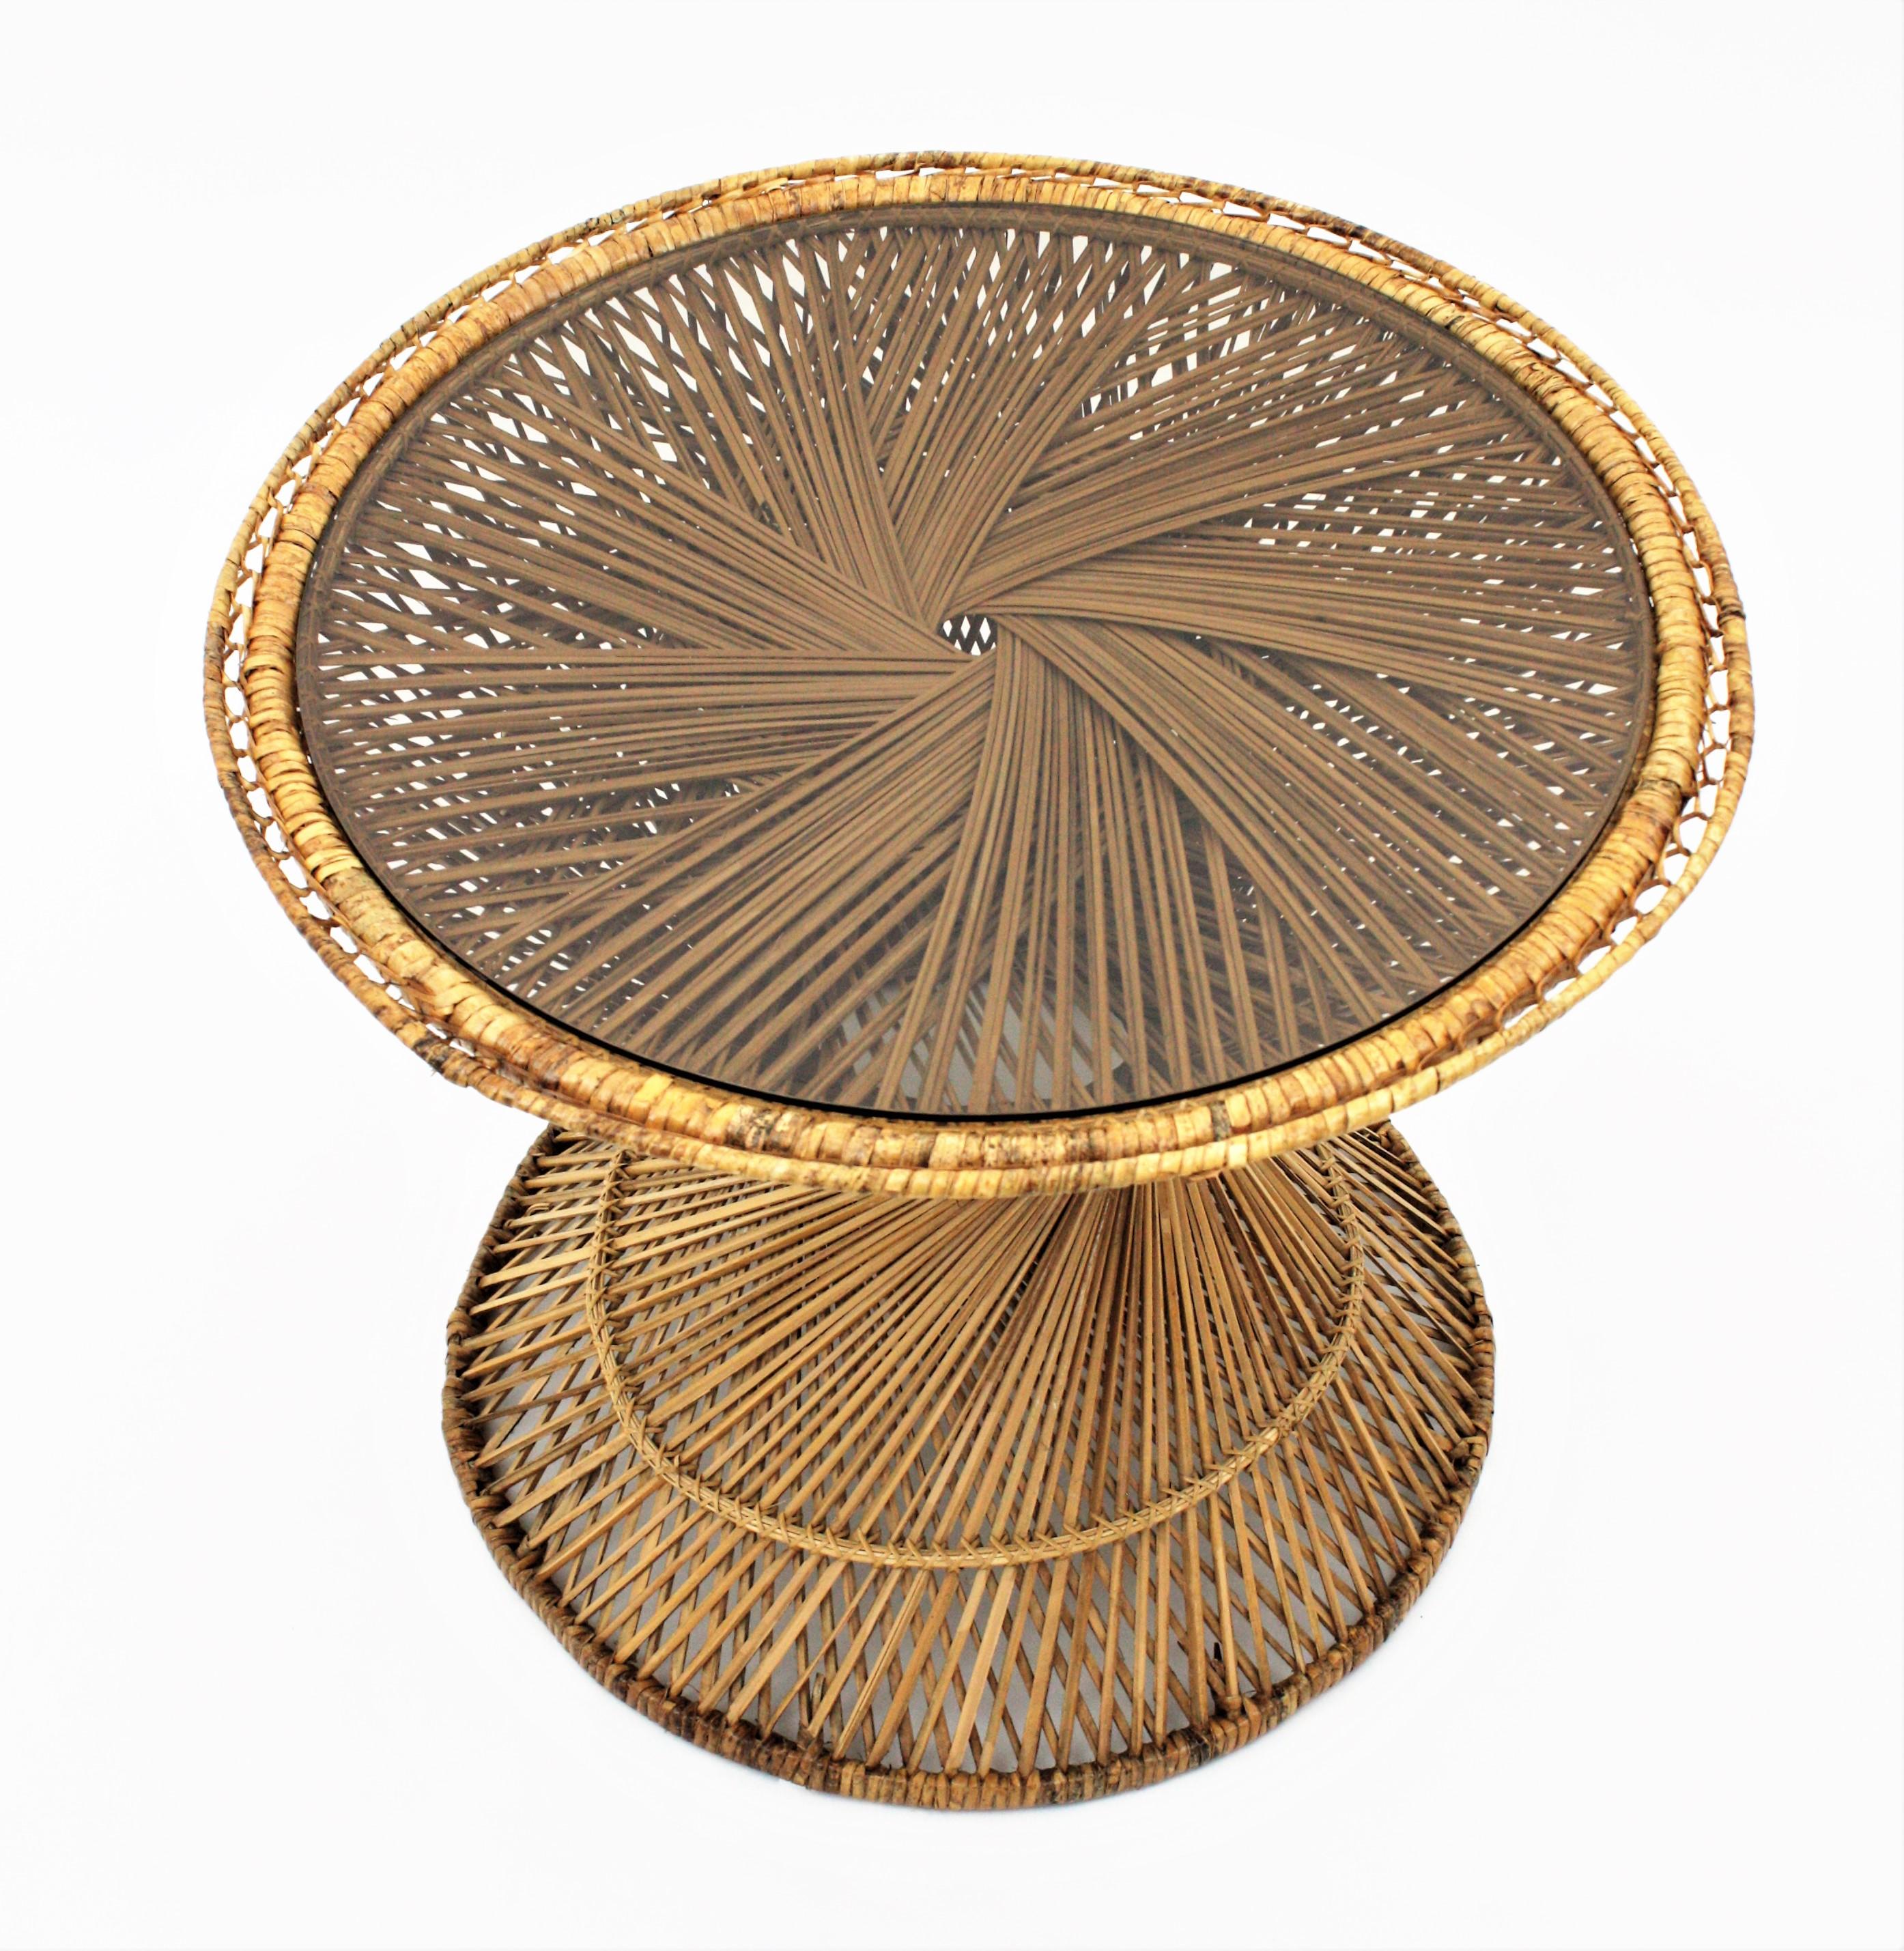 Spanish Woven Wicker and Rattan Emmanuelle Peacock Coffee Table, Spain, 1960s For Sale